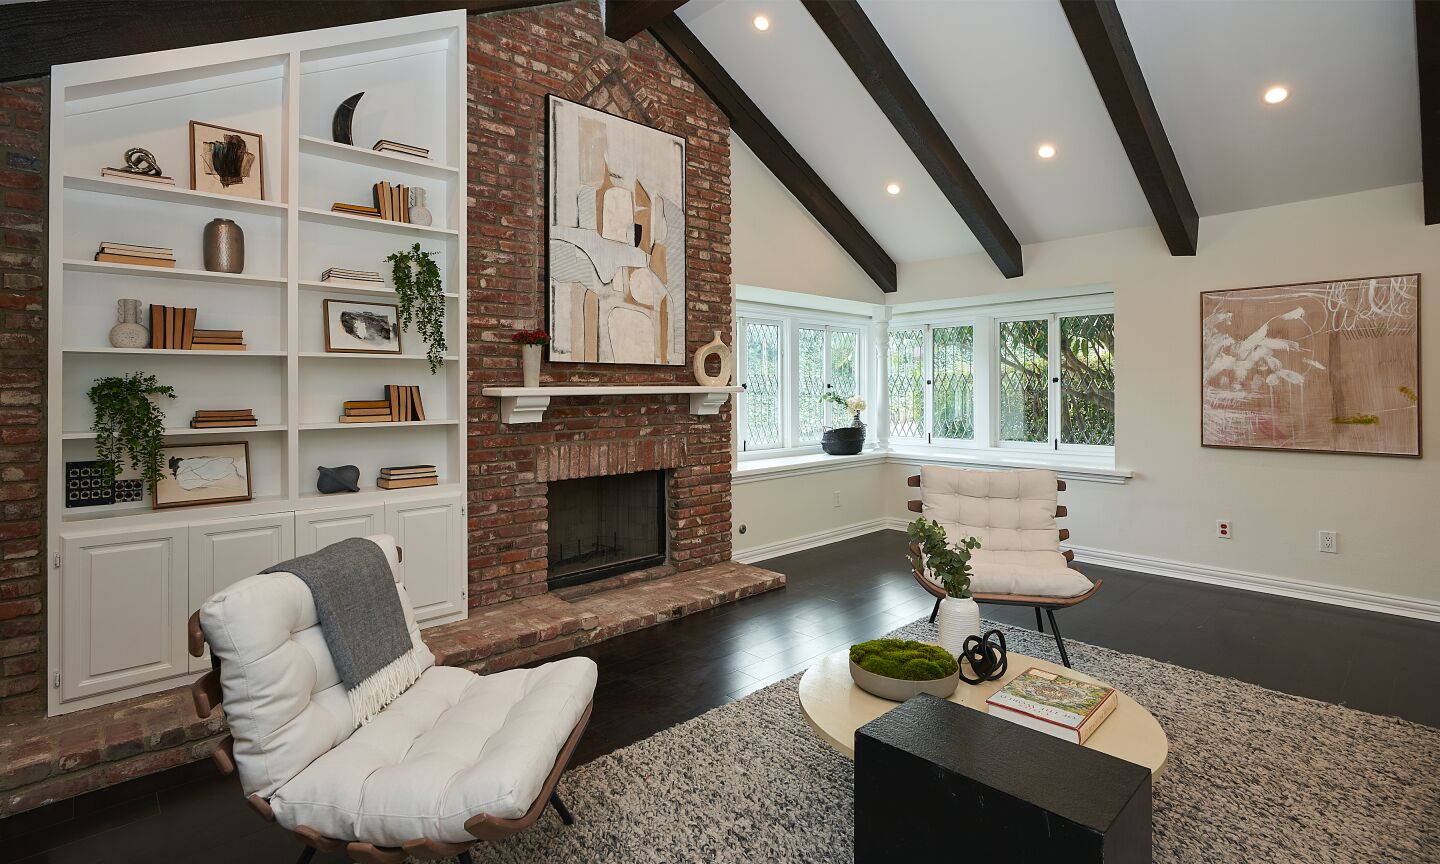 A brick fireplace, with white mantelpiece, alongside tall, shallow built-in shelves and wood beamed ceiling.